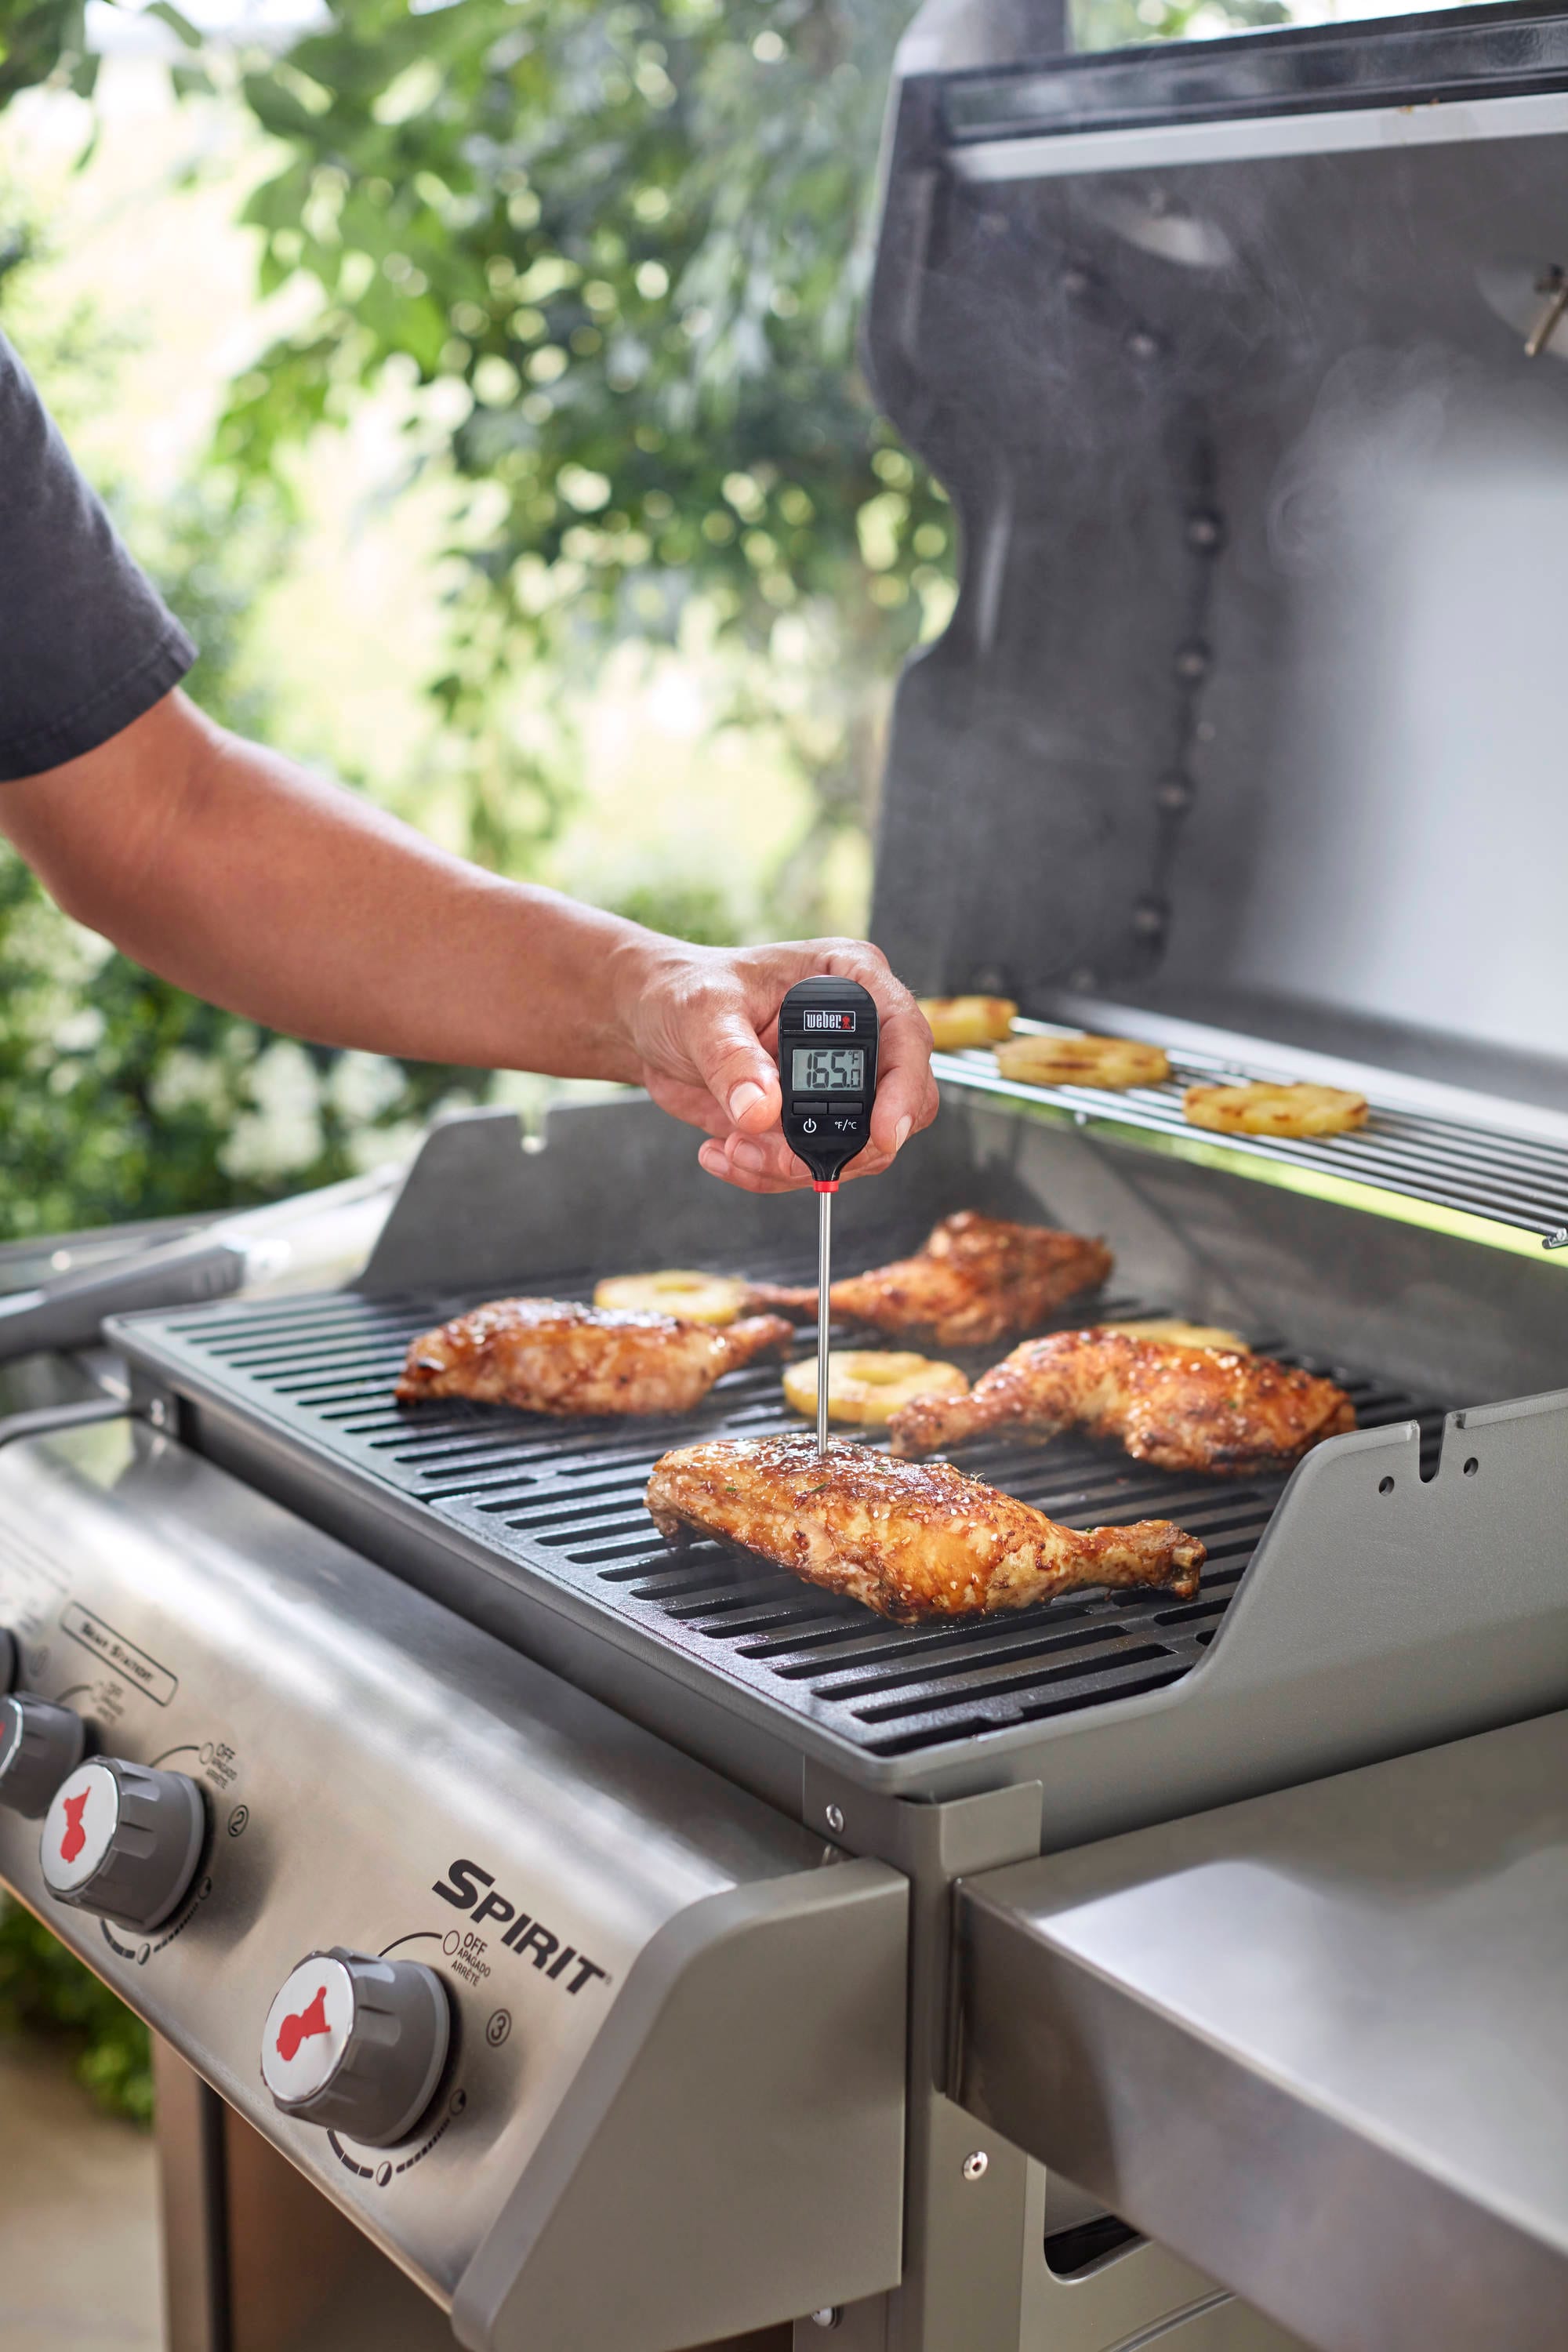 Weber 6742 Barbecue Thermometer Review